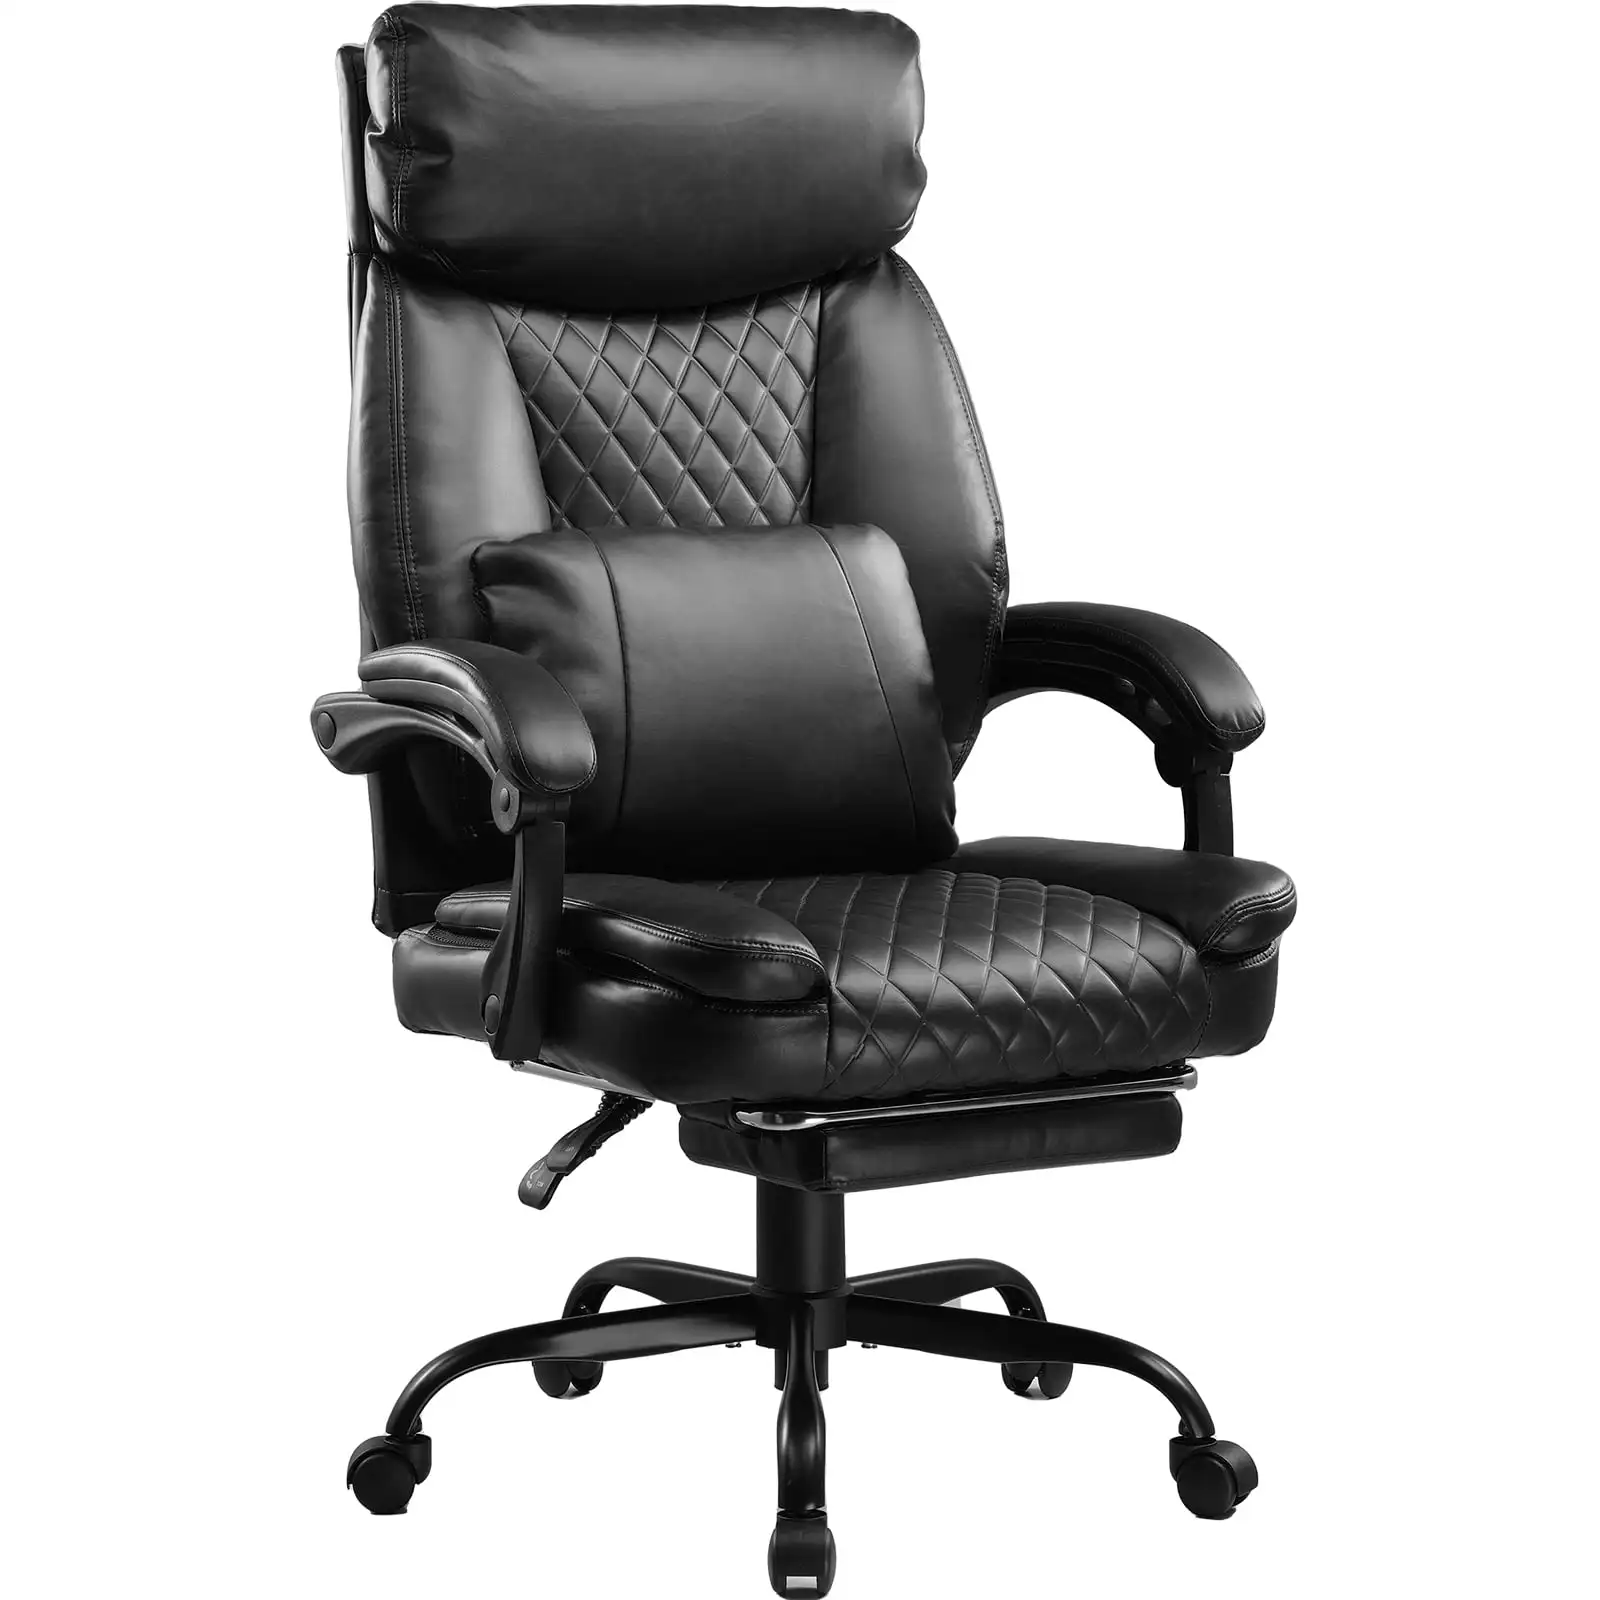 

Big & Tall Ergonomic Executive Chair High-Back PU Leather Reclining Office Chair w/ Footrest High Back Computer Desk Chair Black